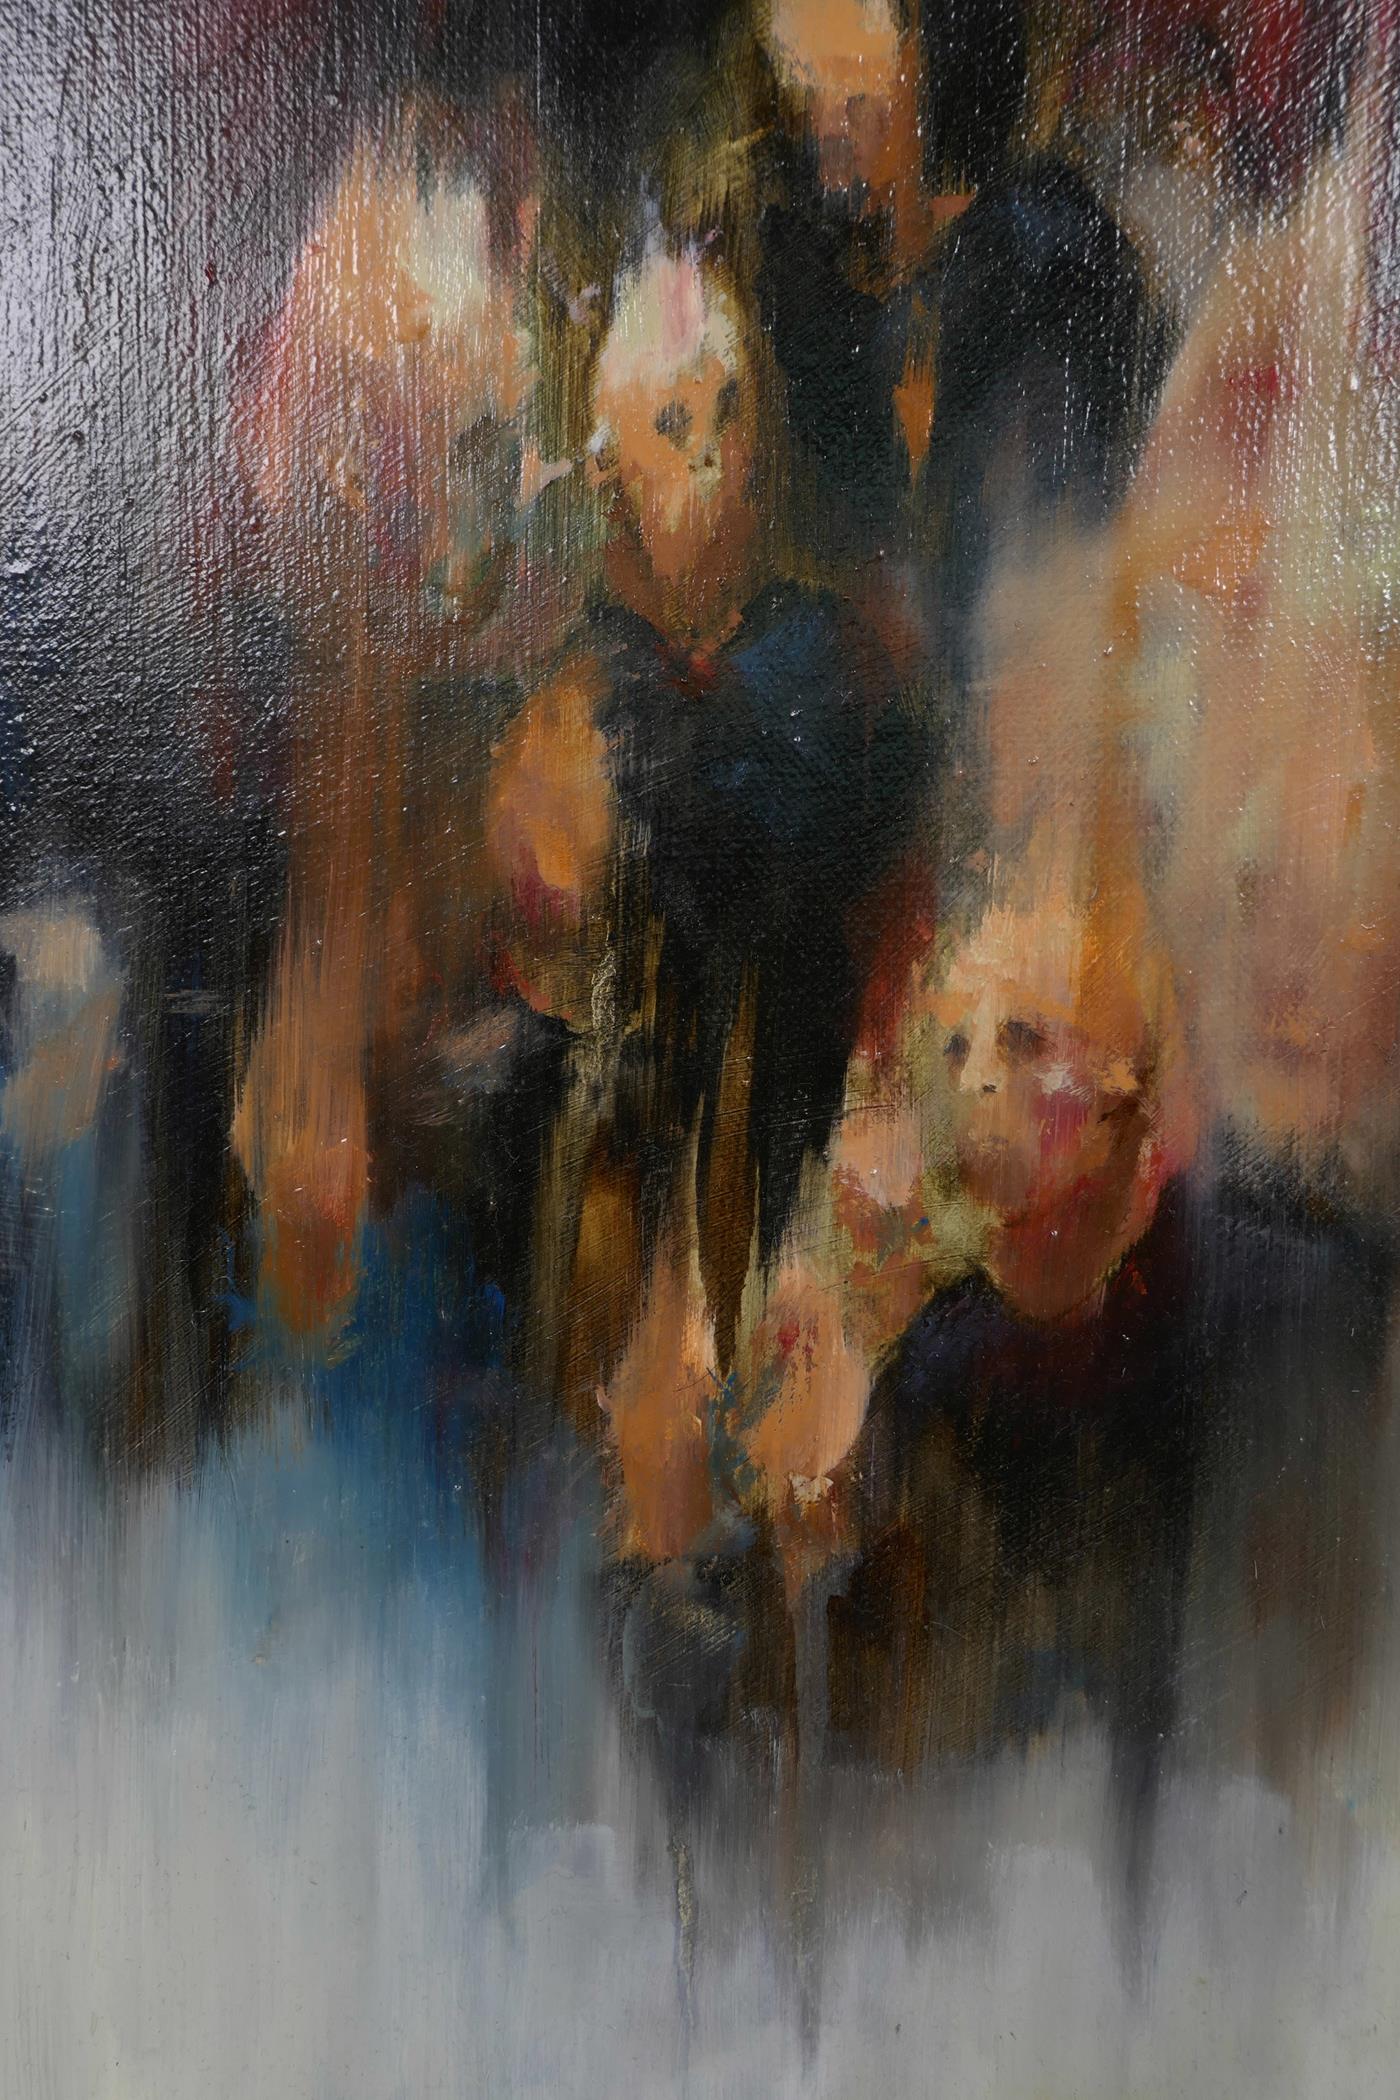 Will Blunt (British, b.1993), 'Into the Light' c.2018, signed verso, oil on canvas, 16" x 12" - Image 4 of 6